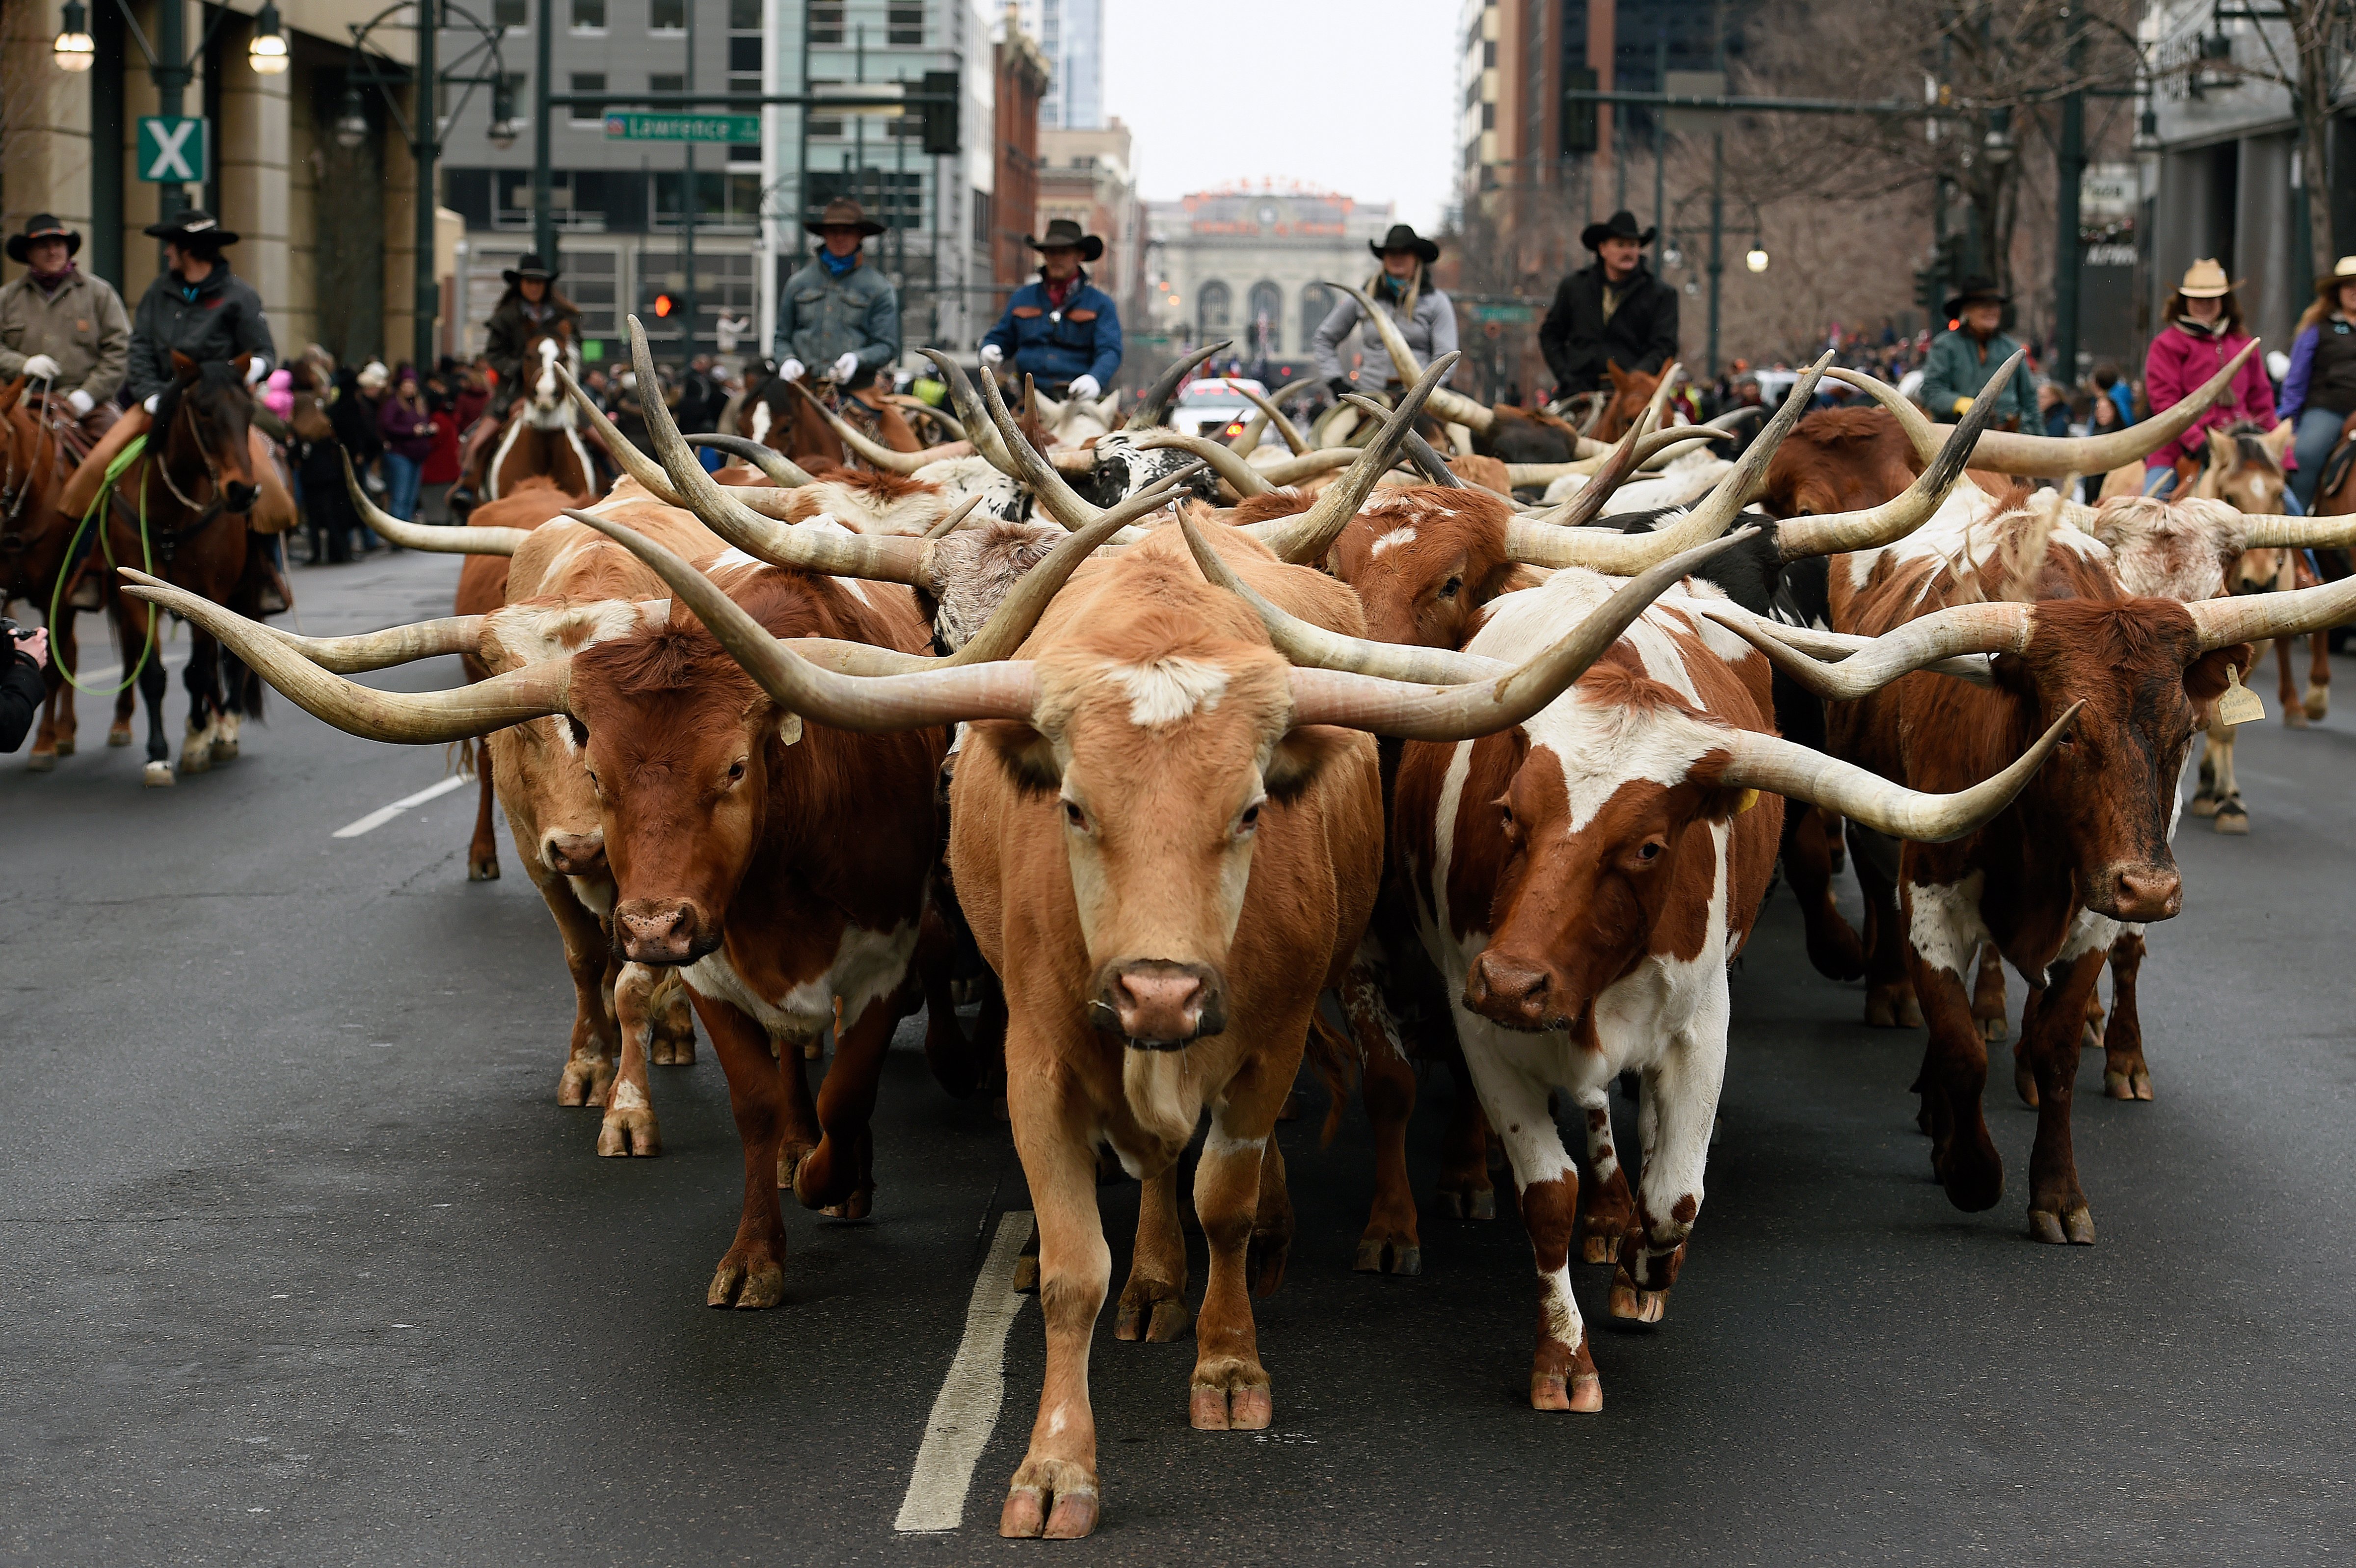 A herd of Texas Longhorn cattle, belonging to the Searle Ranch, leads the annual National Western Stock Show parade as it makes its way up 17th Avenue in Denver on Jan. 7, 2016 (Helen H. Richardson—Denver Post/Getty Images)